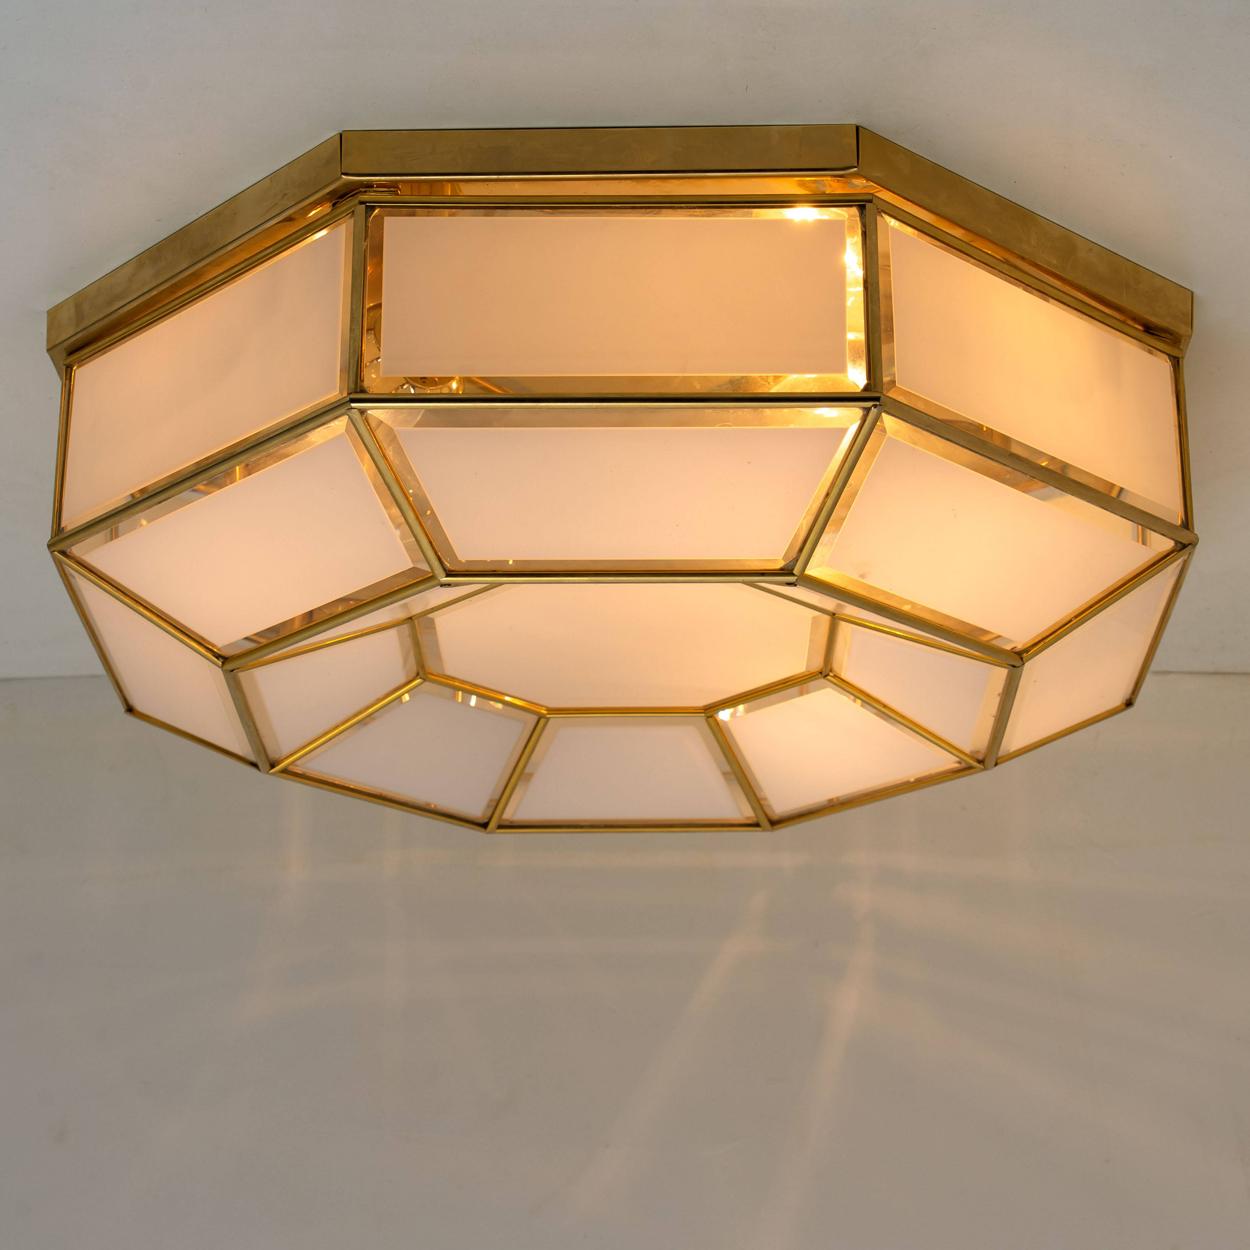 This beautiful and unique octagonal glass light flush mount or wall light is manufactured in Germany during the 1970s, (early 1970s). Nice craftsmanship. Minimal, geometric and simply shaped design. Opal glass with brass frame.

Designed as